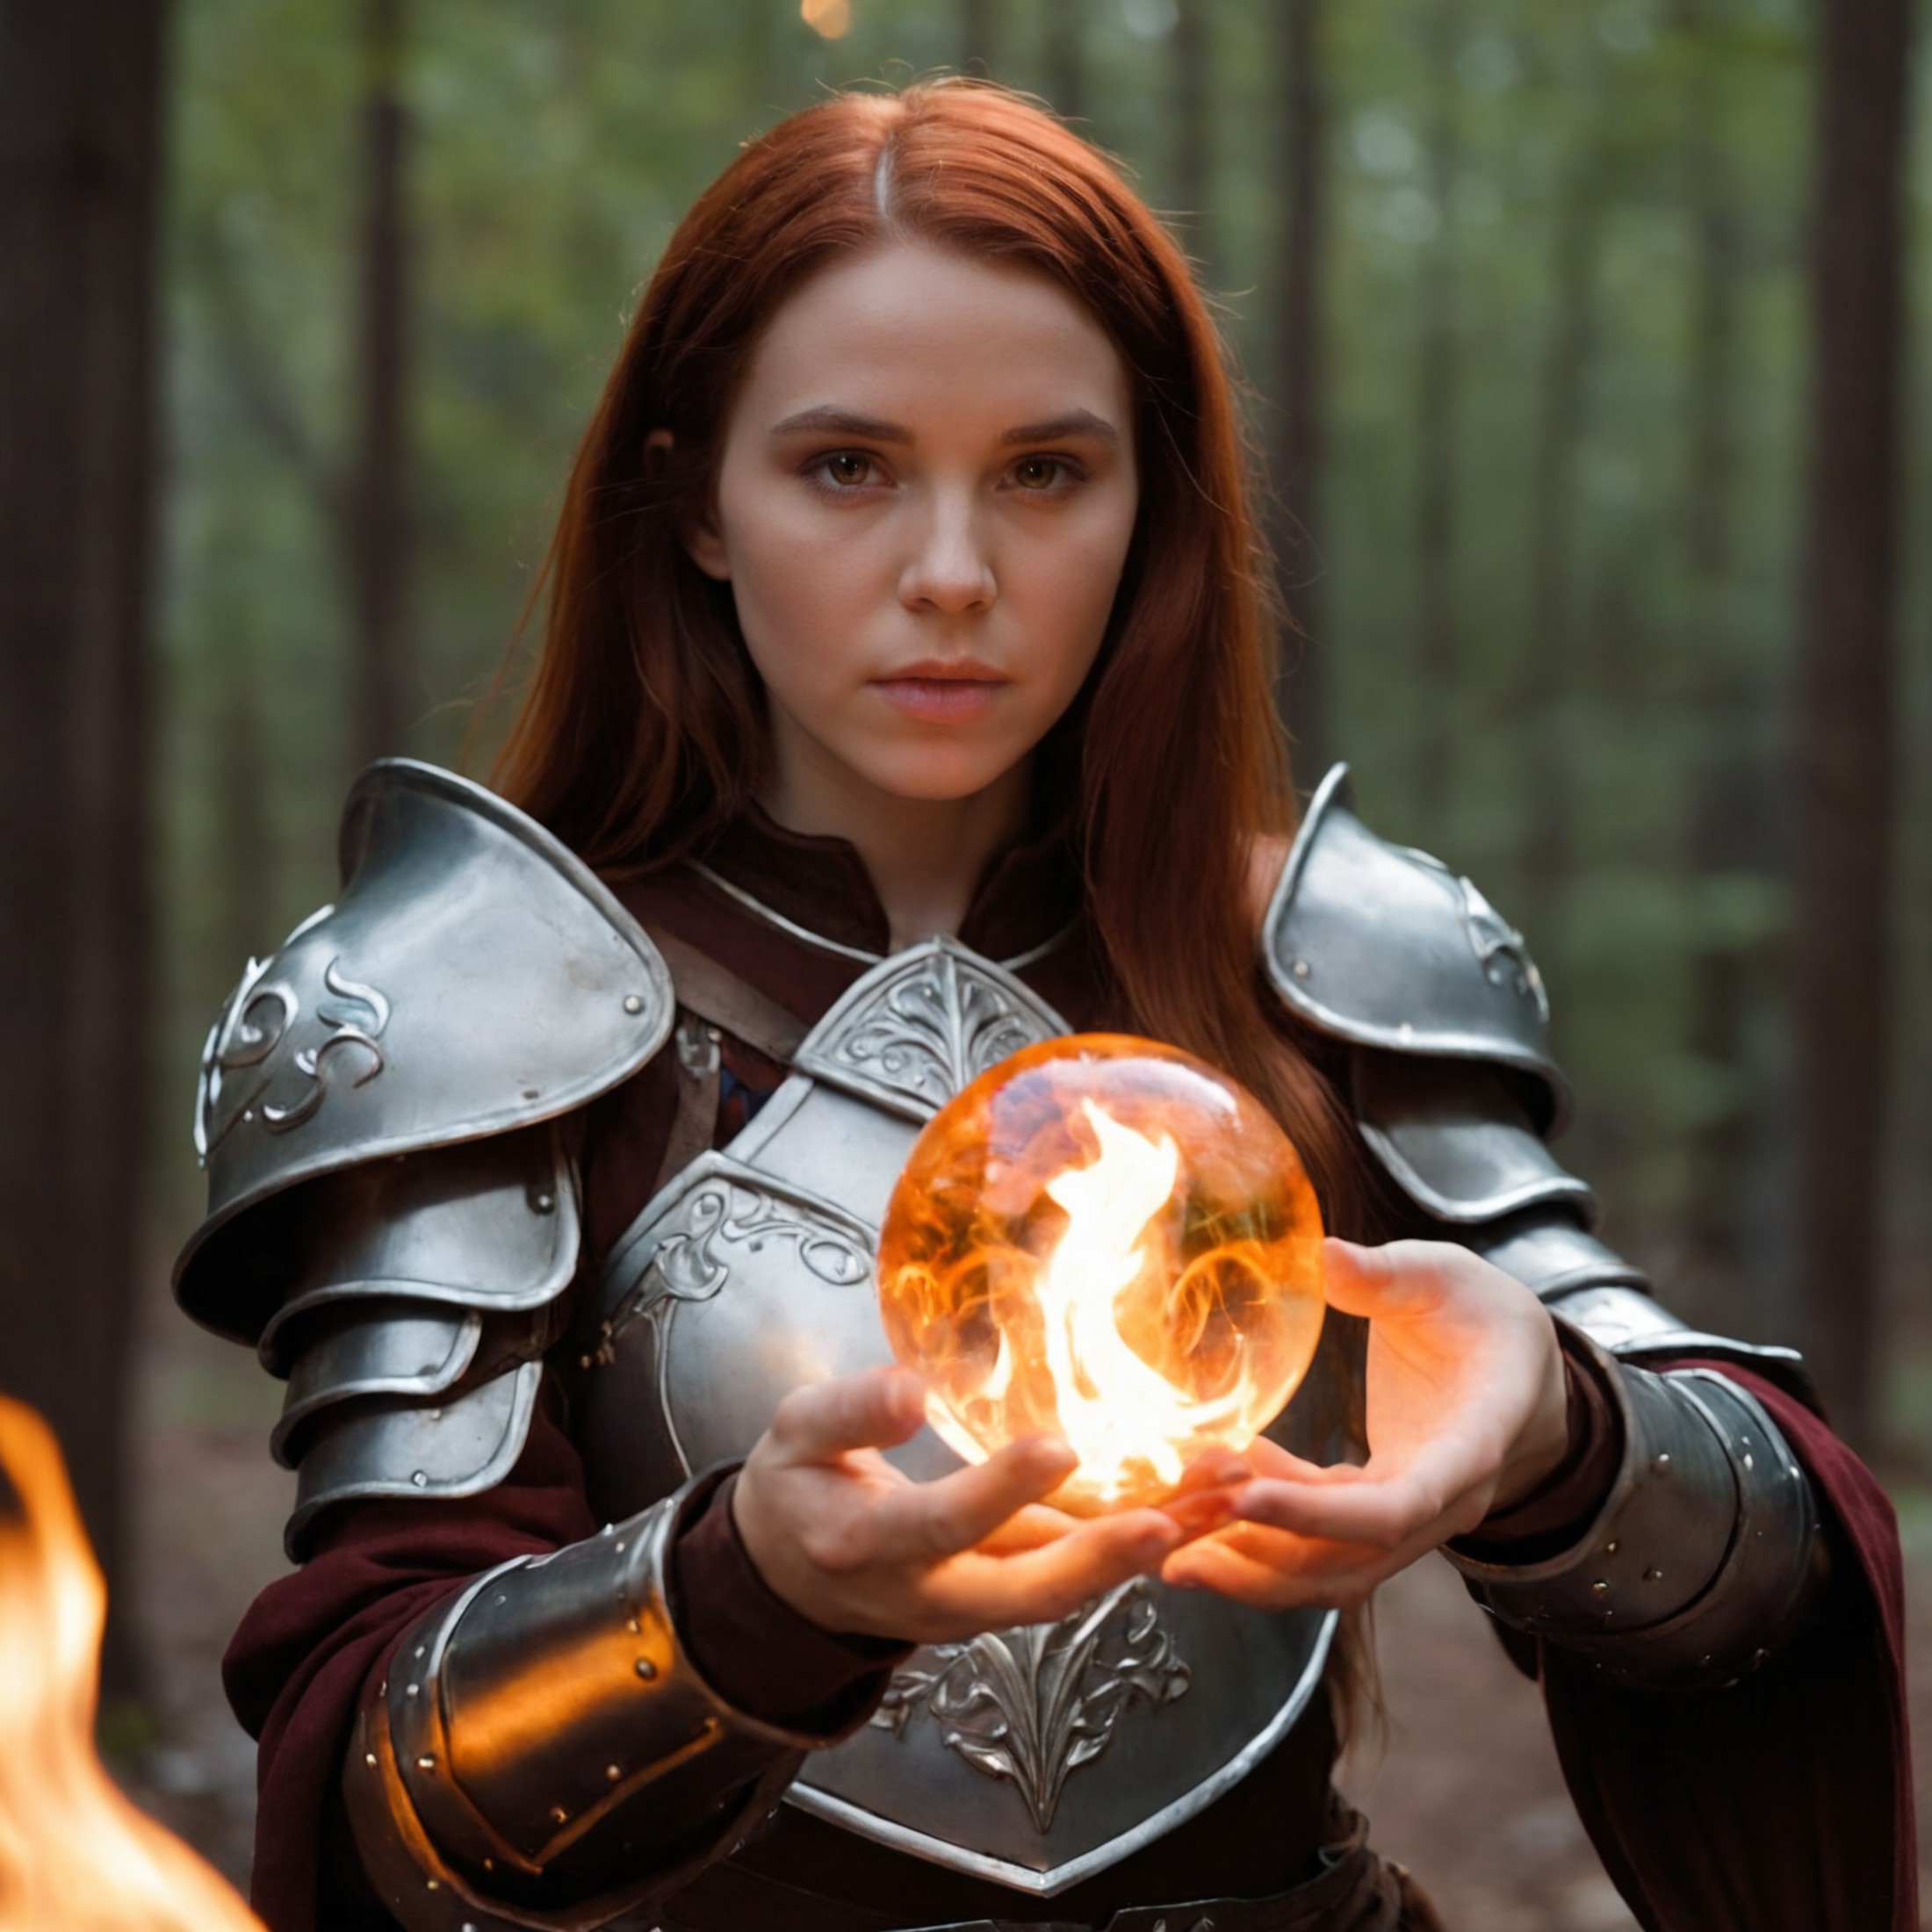 cinematic film still, a mage woman, 20 years old, holding a magic fire glass orb, glass mage armor,